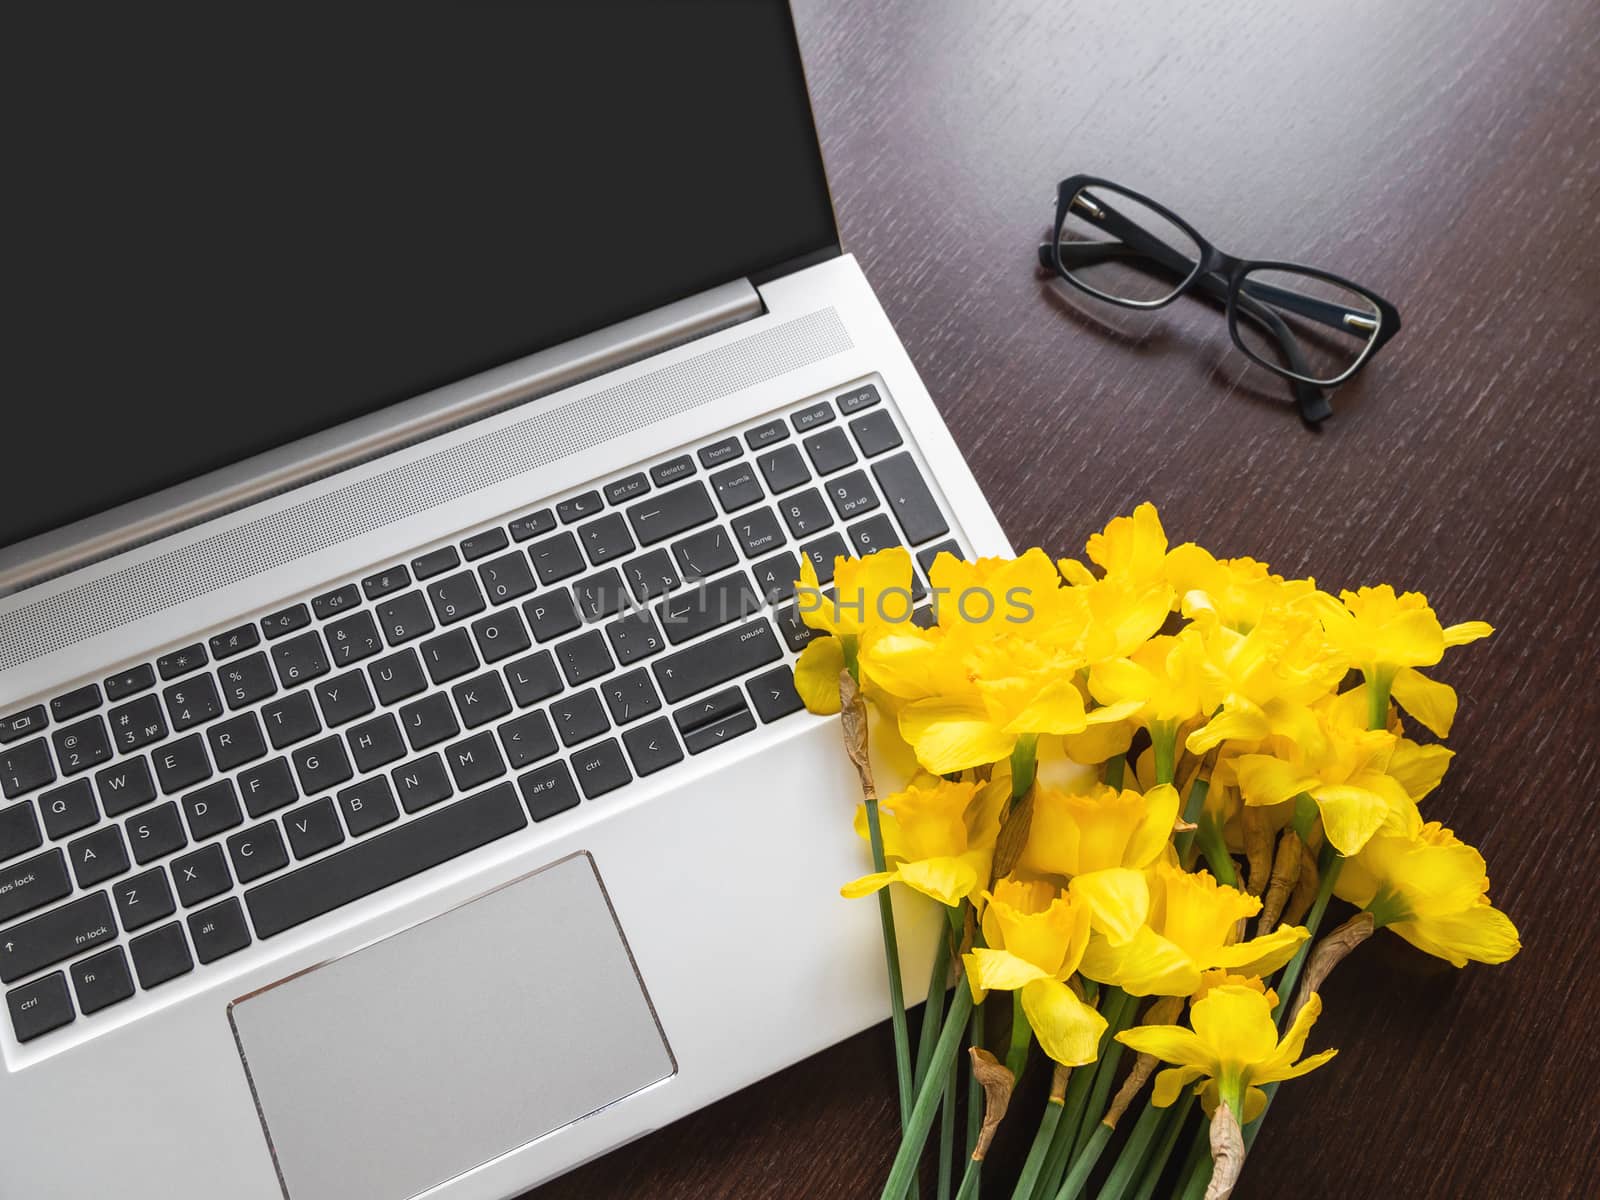 Bouquet of Narcissus or daffodils lying on silver metal laptop. Bright yellow flowers on portable device. Wooden background with glasses.